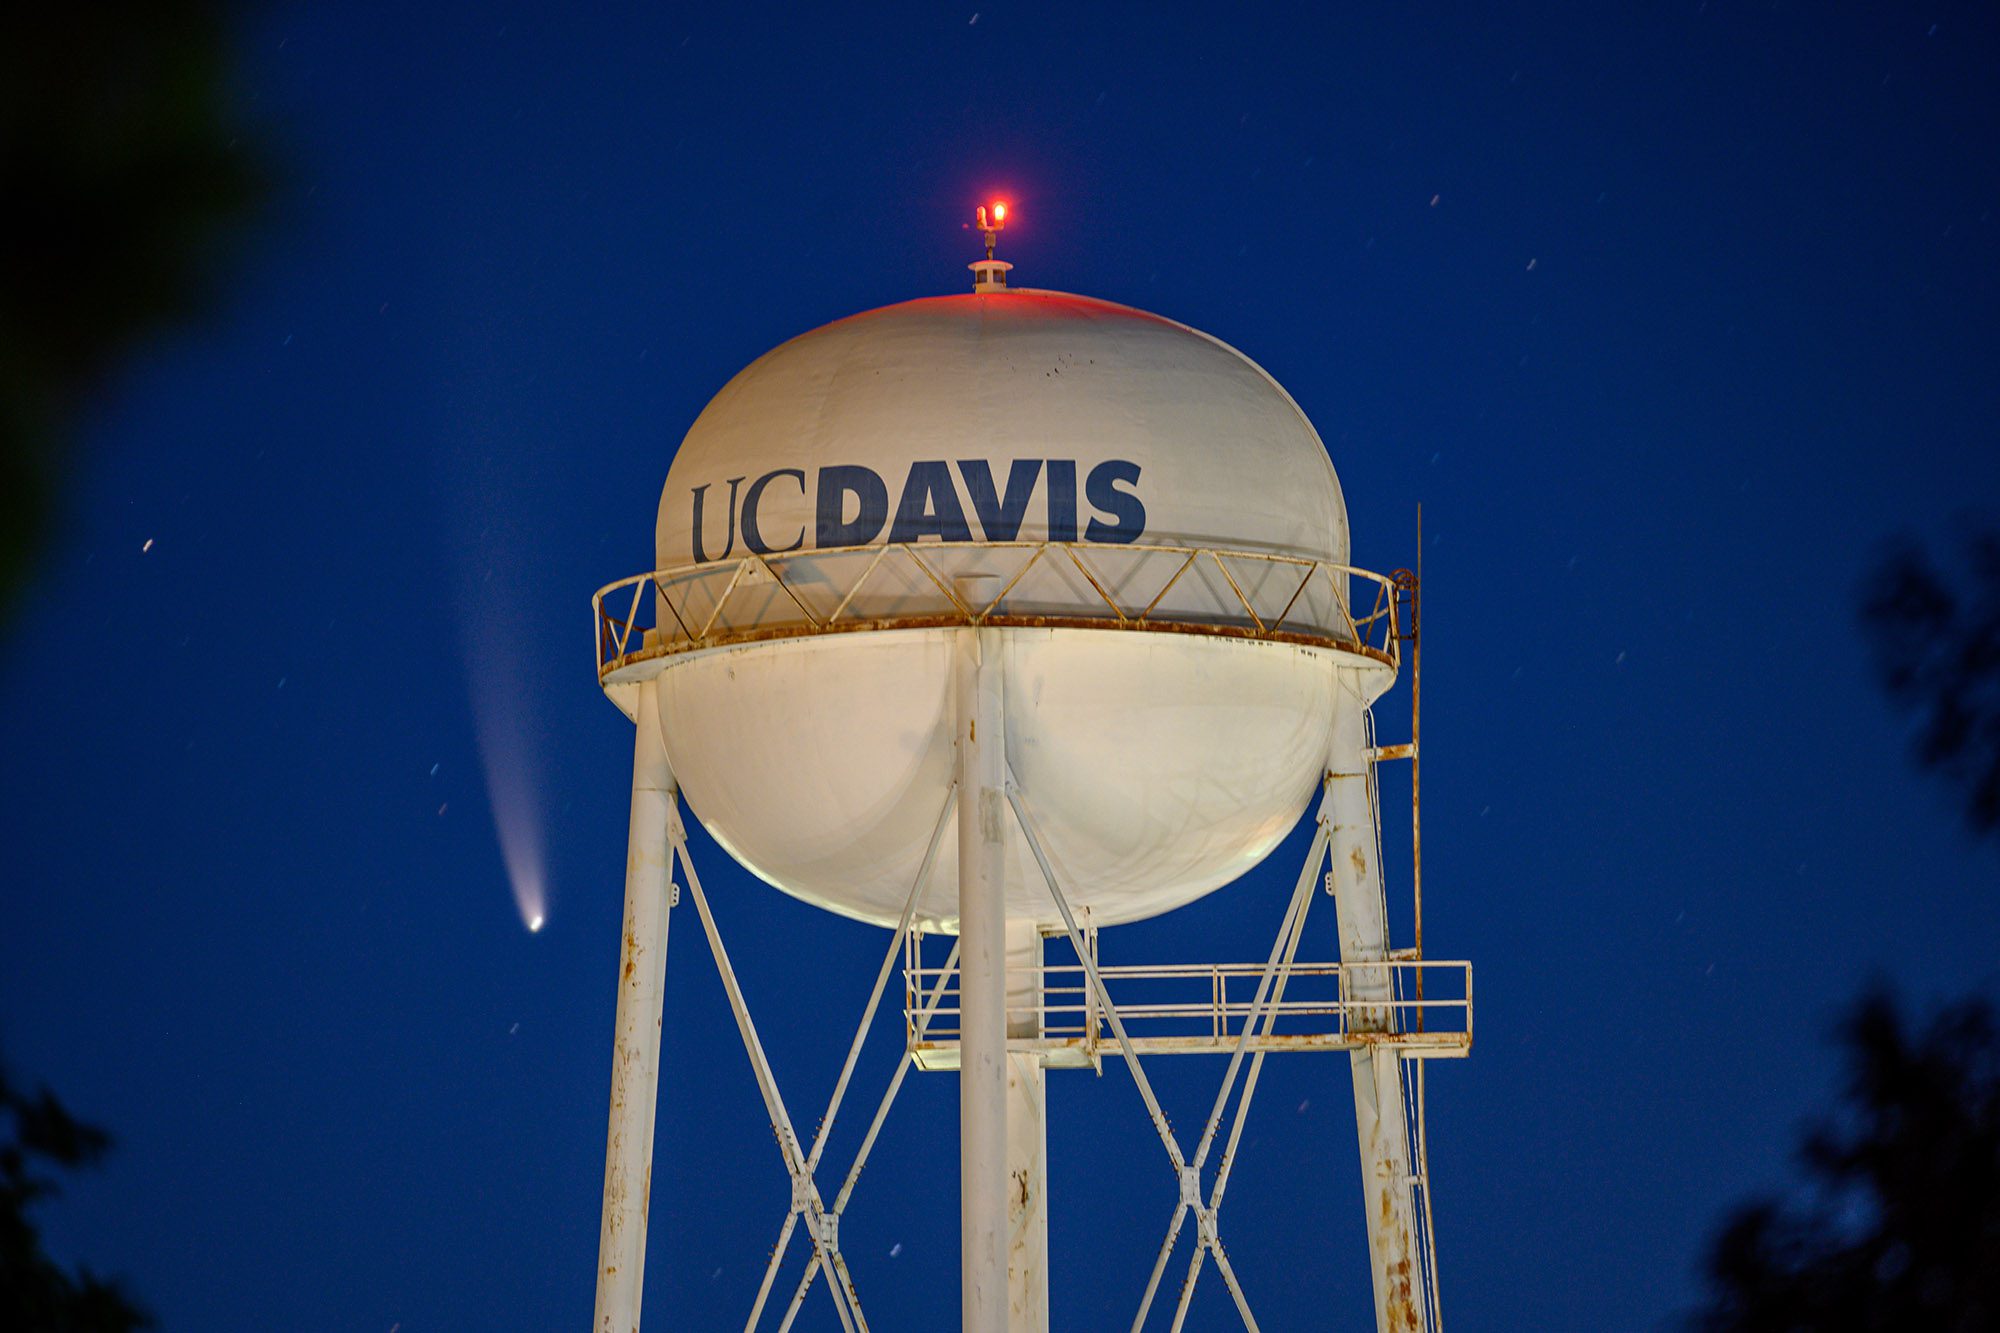 Water tower lit up at night with comet in the sky